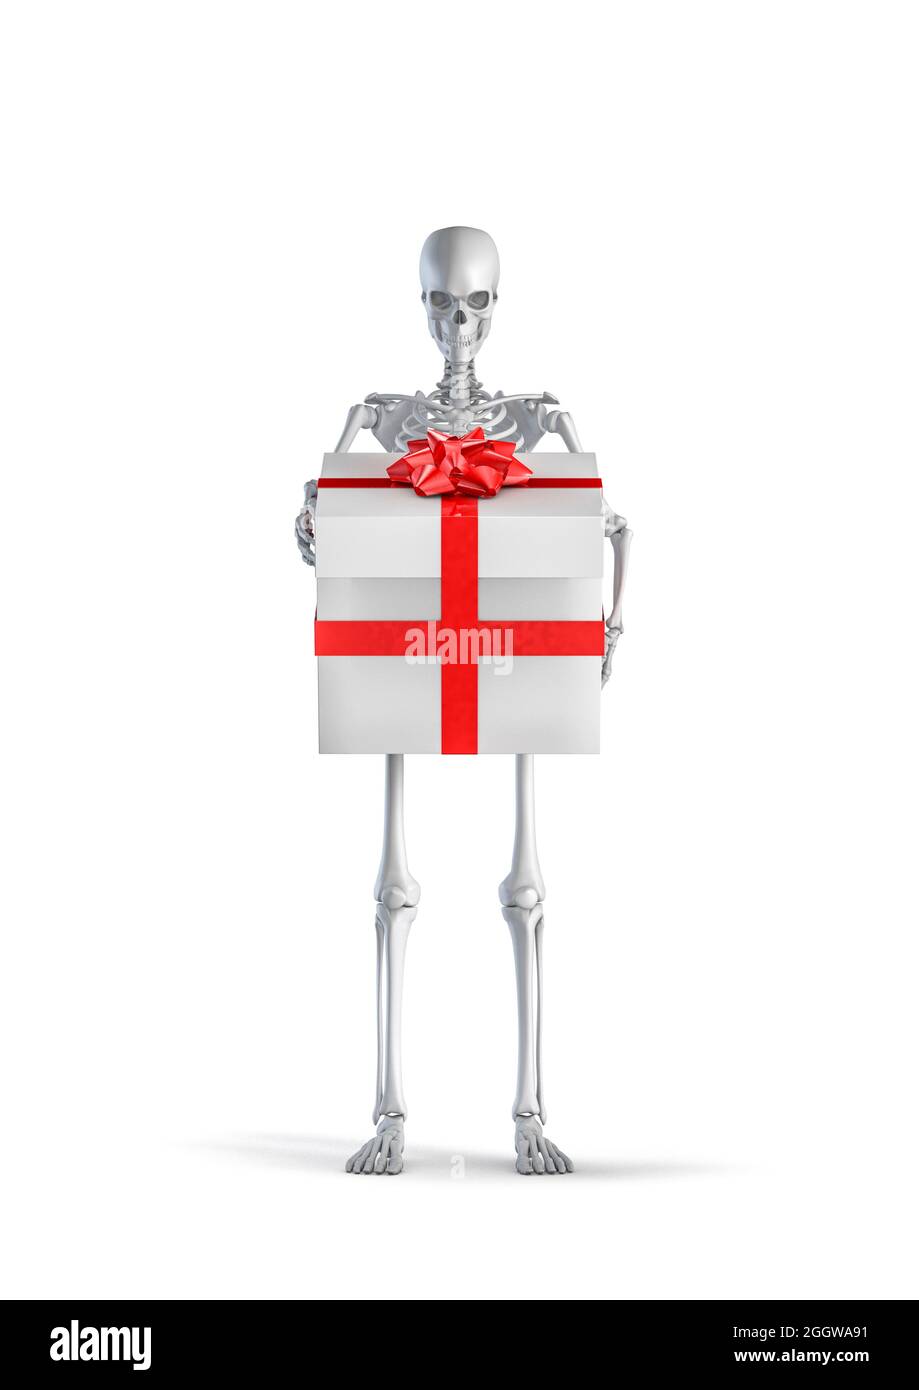 Skeleton with present - 3D illustration of male human skeleton figure holding gift box wrapped with red ribbon isolated on white studio background Stock Photo